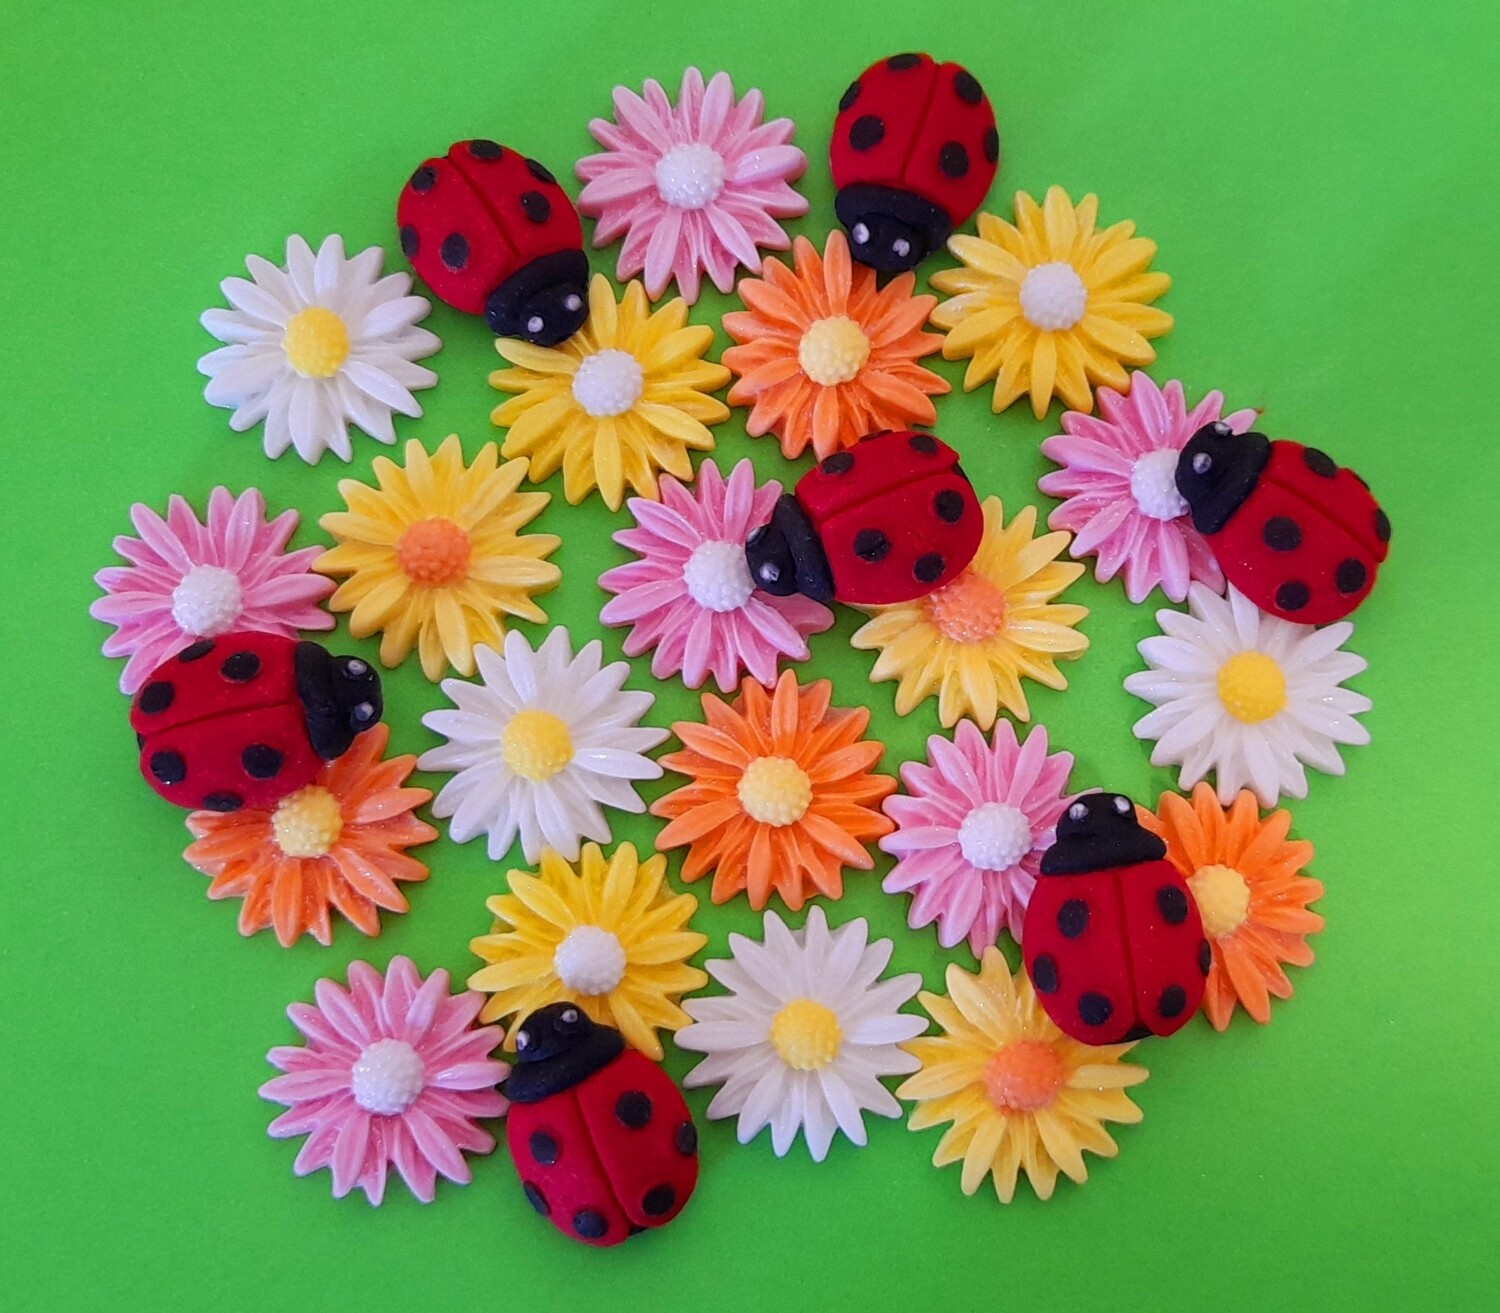 Daisies and Ladybirds